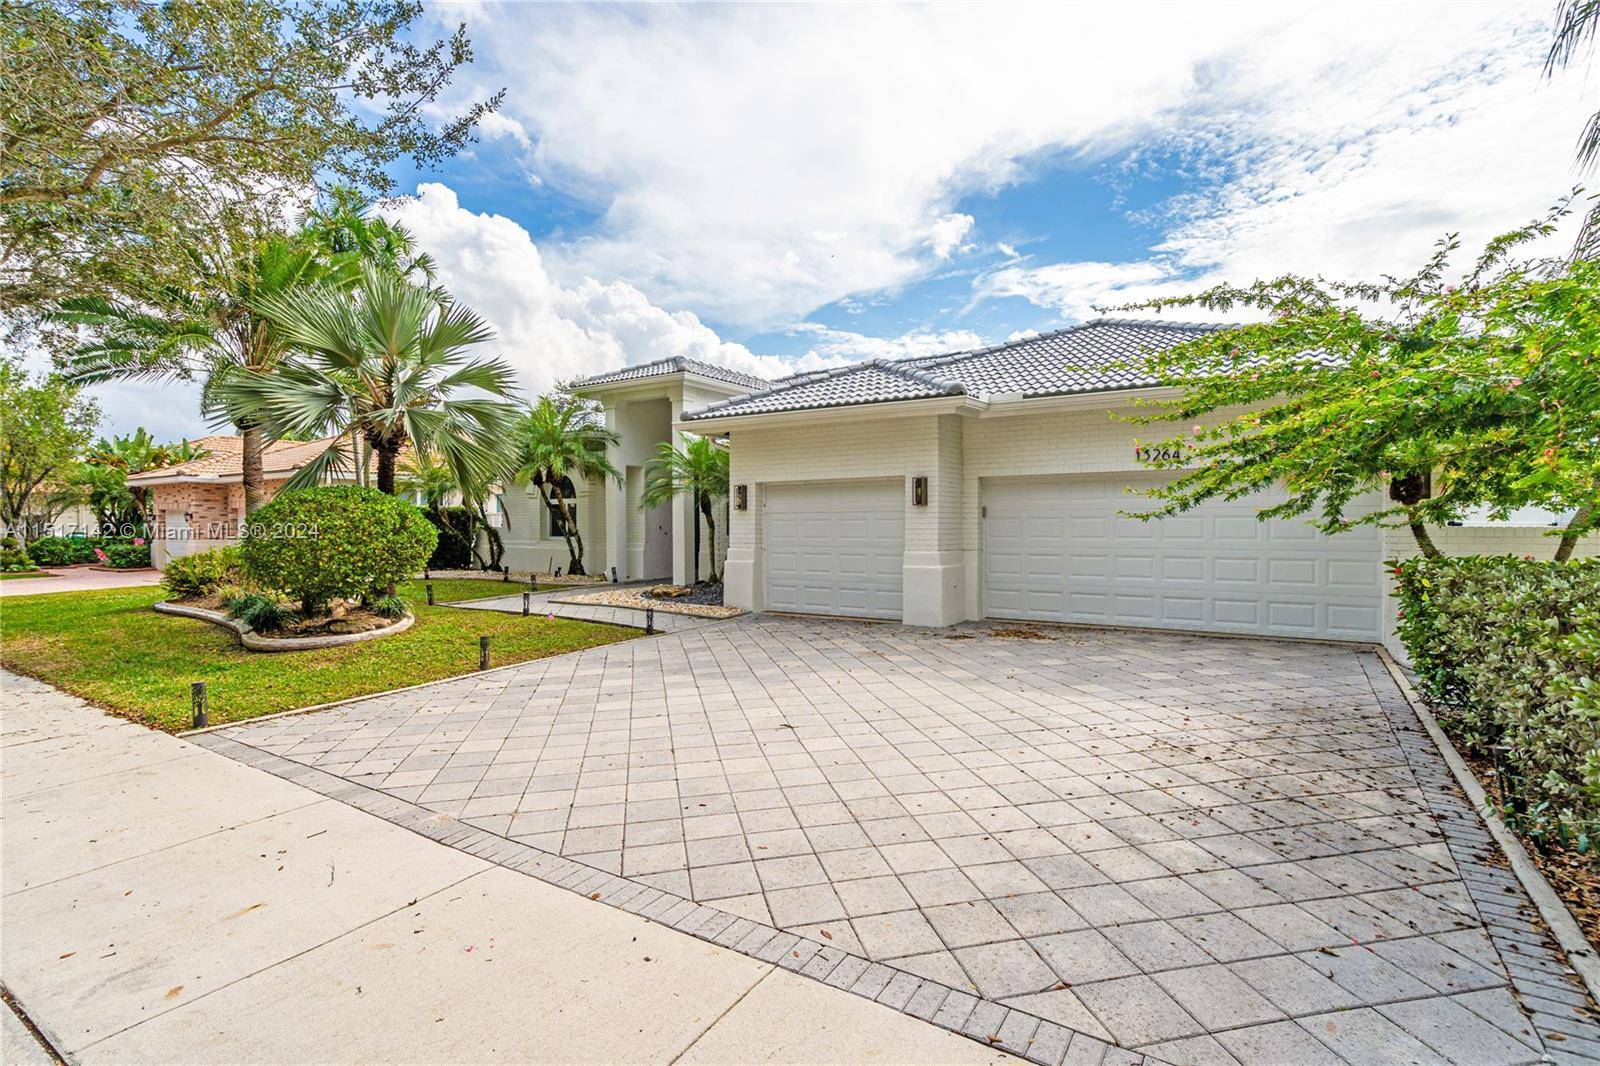 Beautiful 4 Bedroom, 2. 5 Bath home in the prestigious gated community of Country Glen.